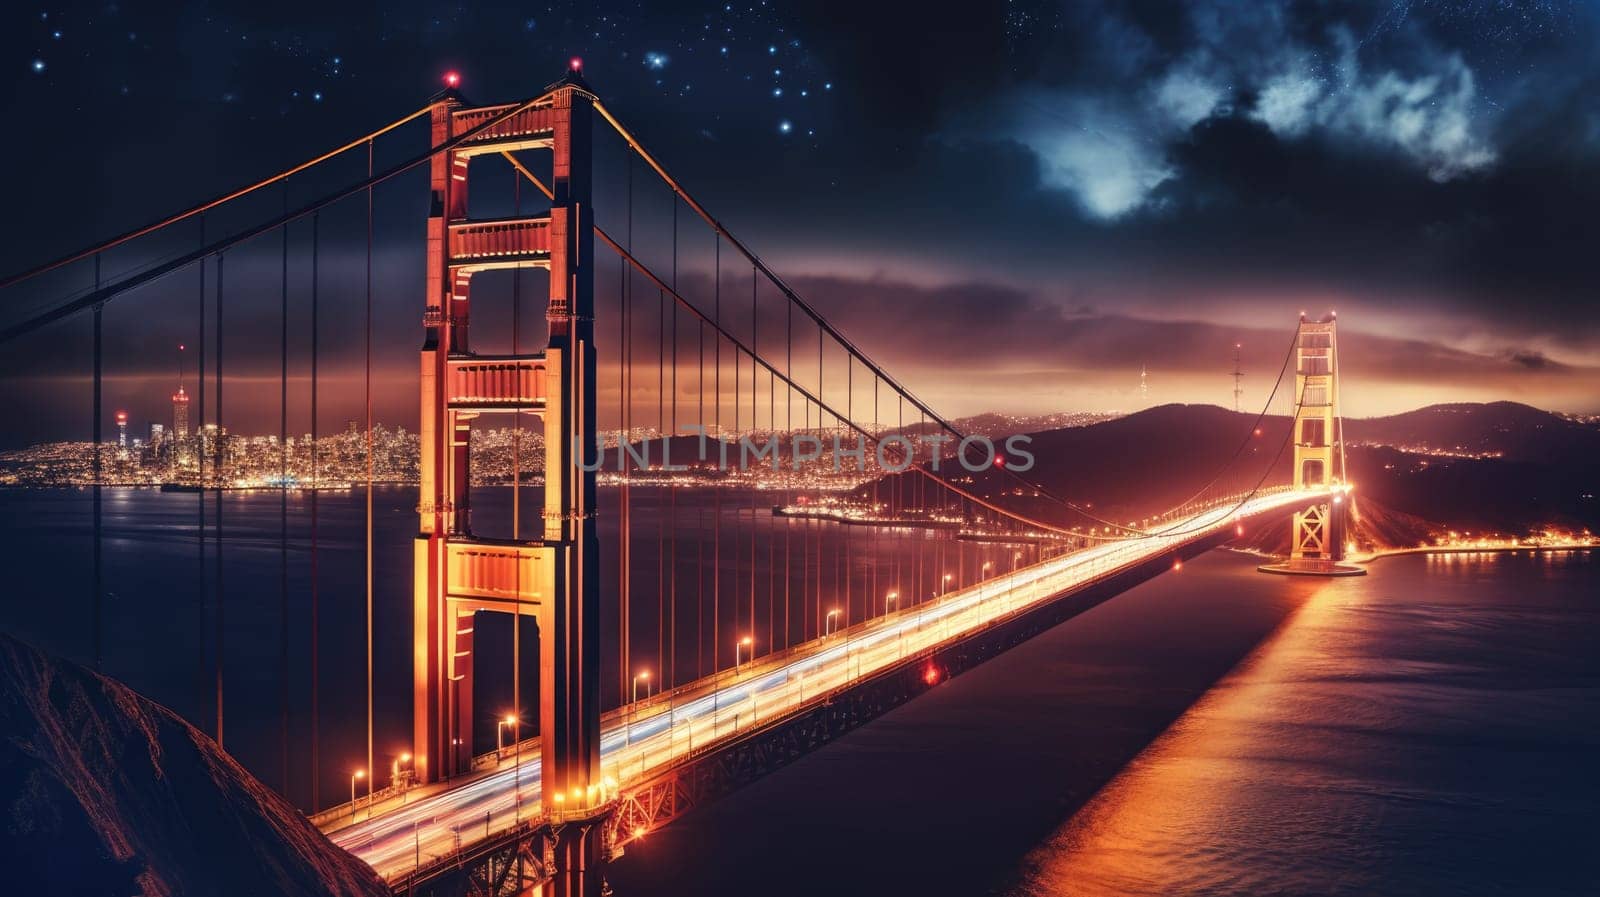 The iconic Golden Gate Bridge is a stunning sight, especially at night. The lights reflecting off the water create a magical scene, perfect for photography enthusiasts.